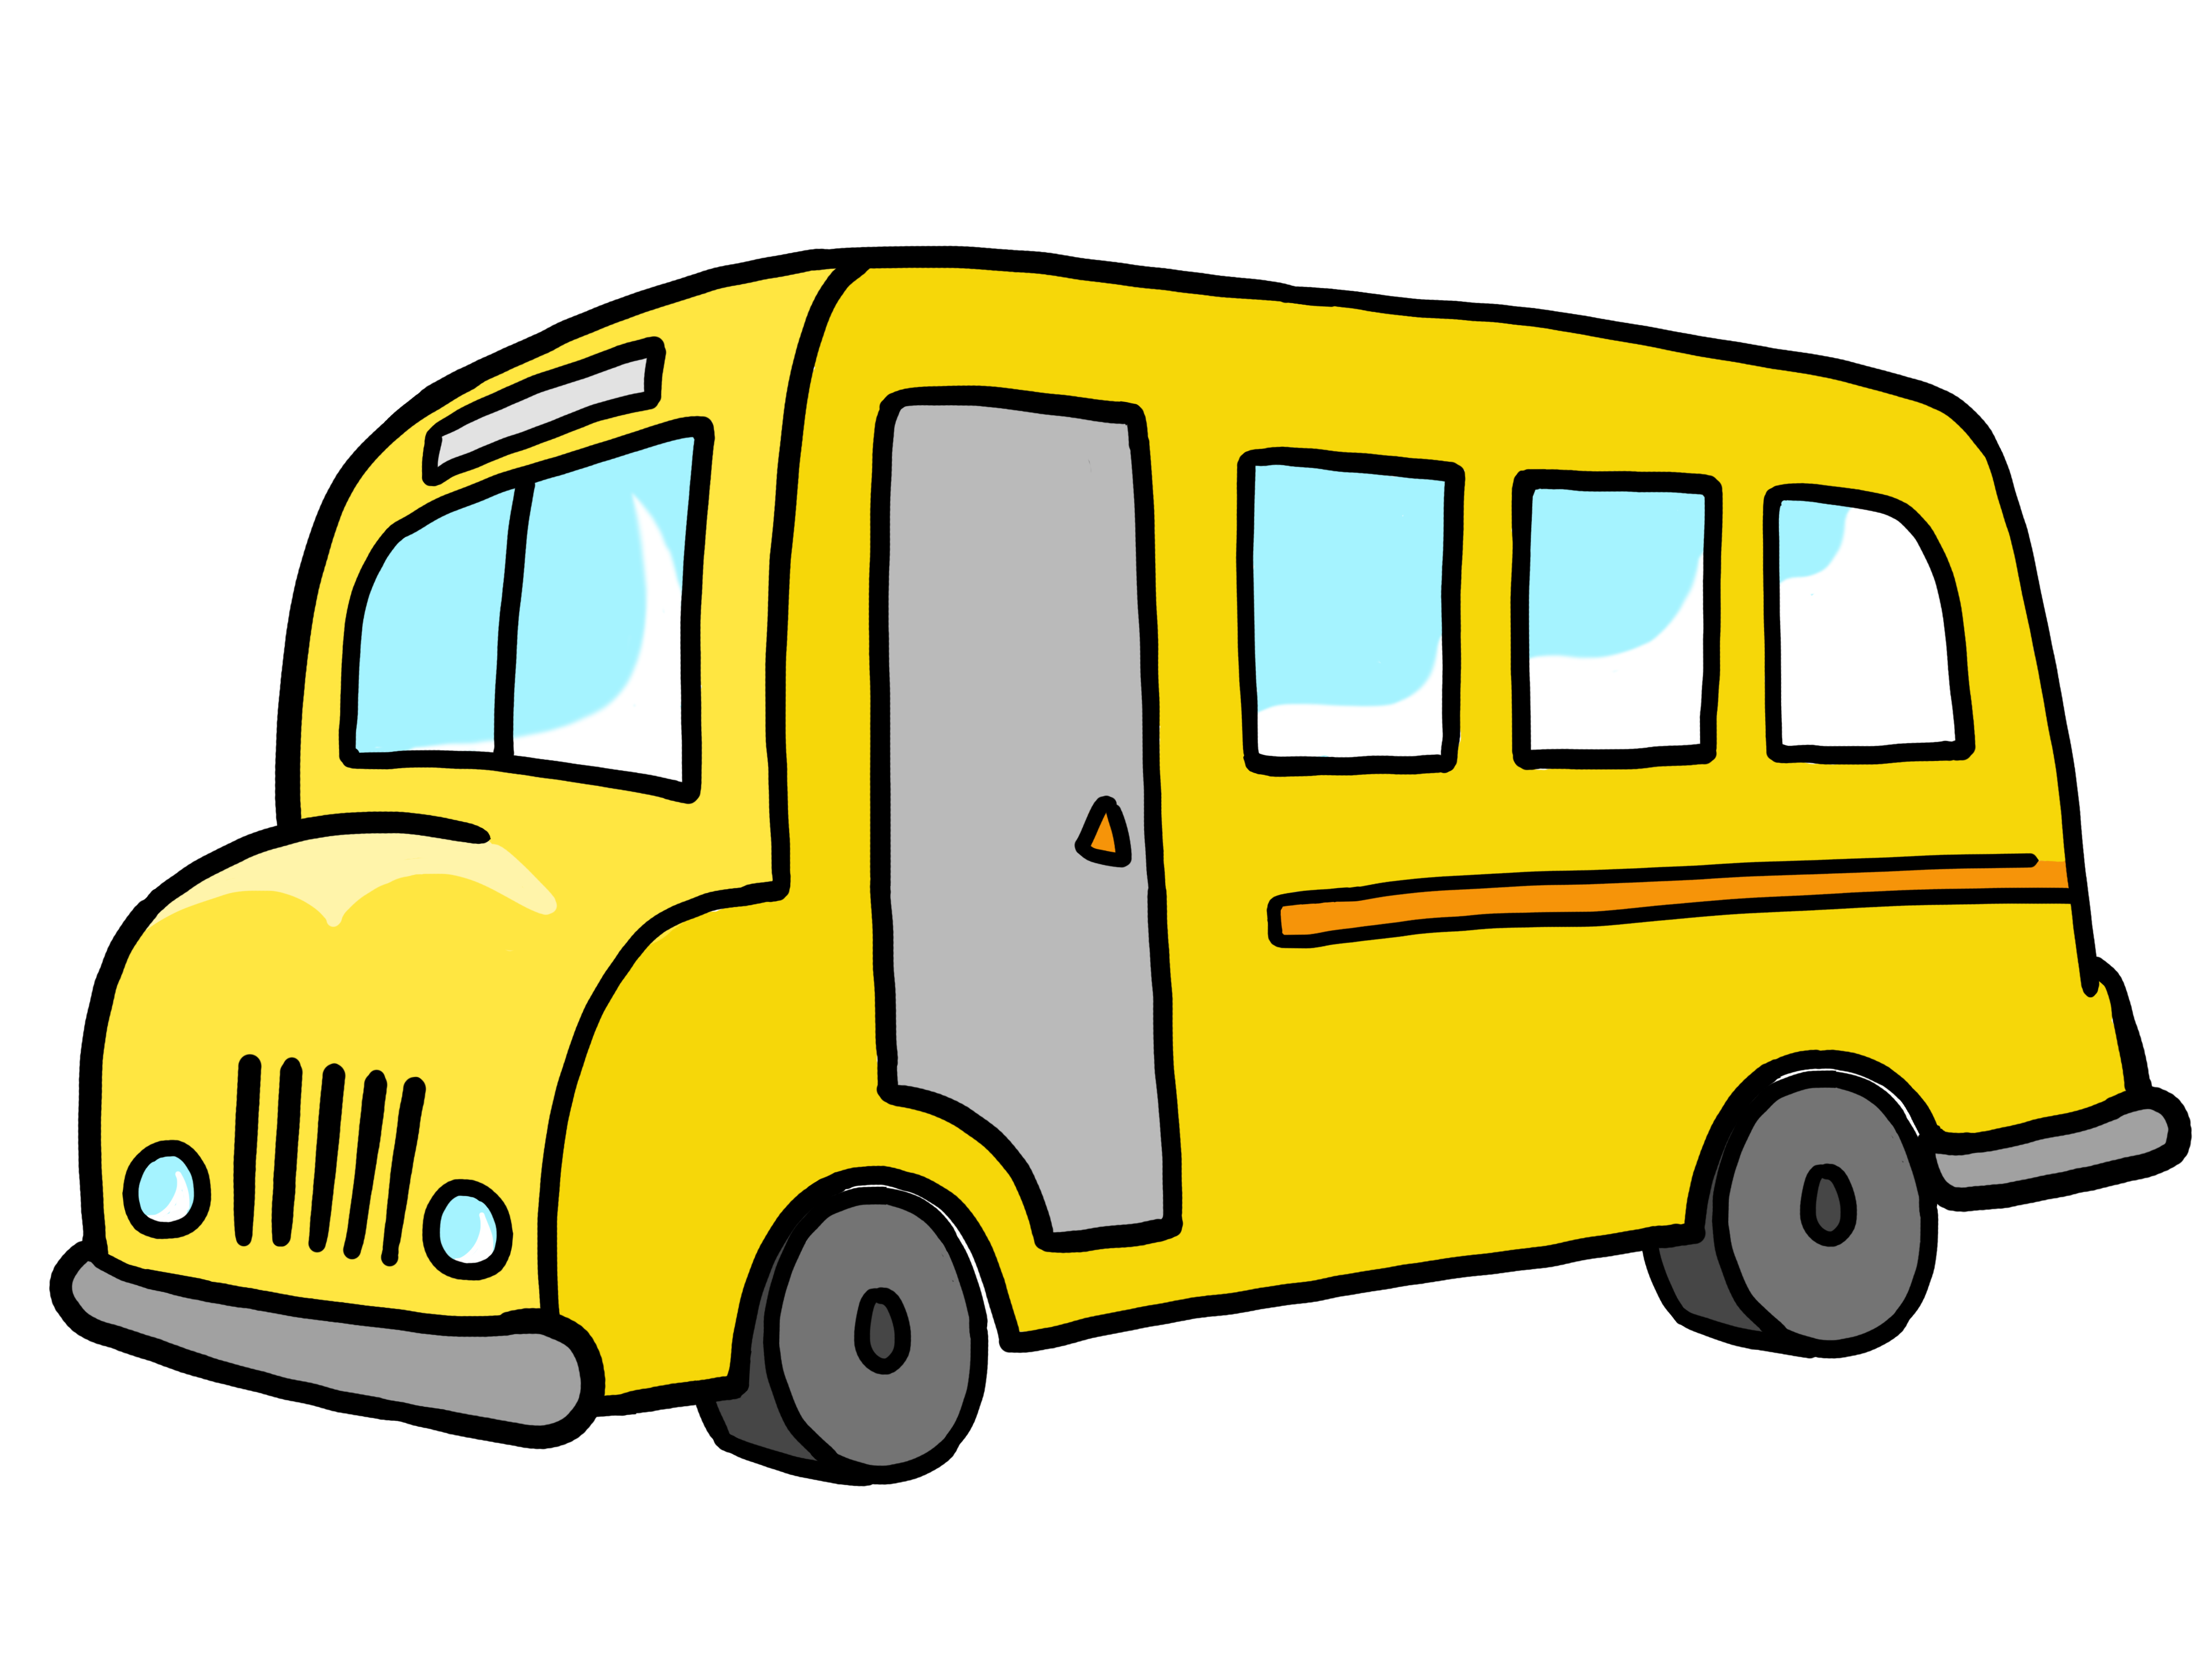 charter bus clipart - photo #47